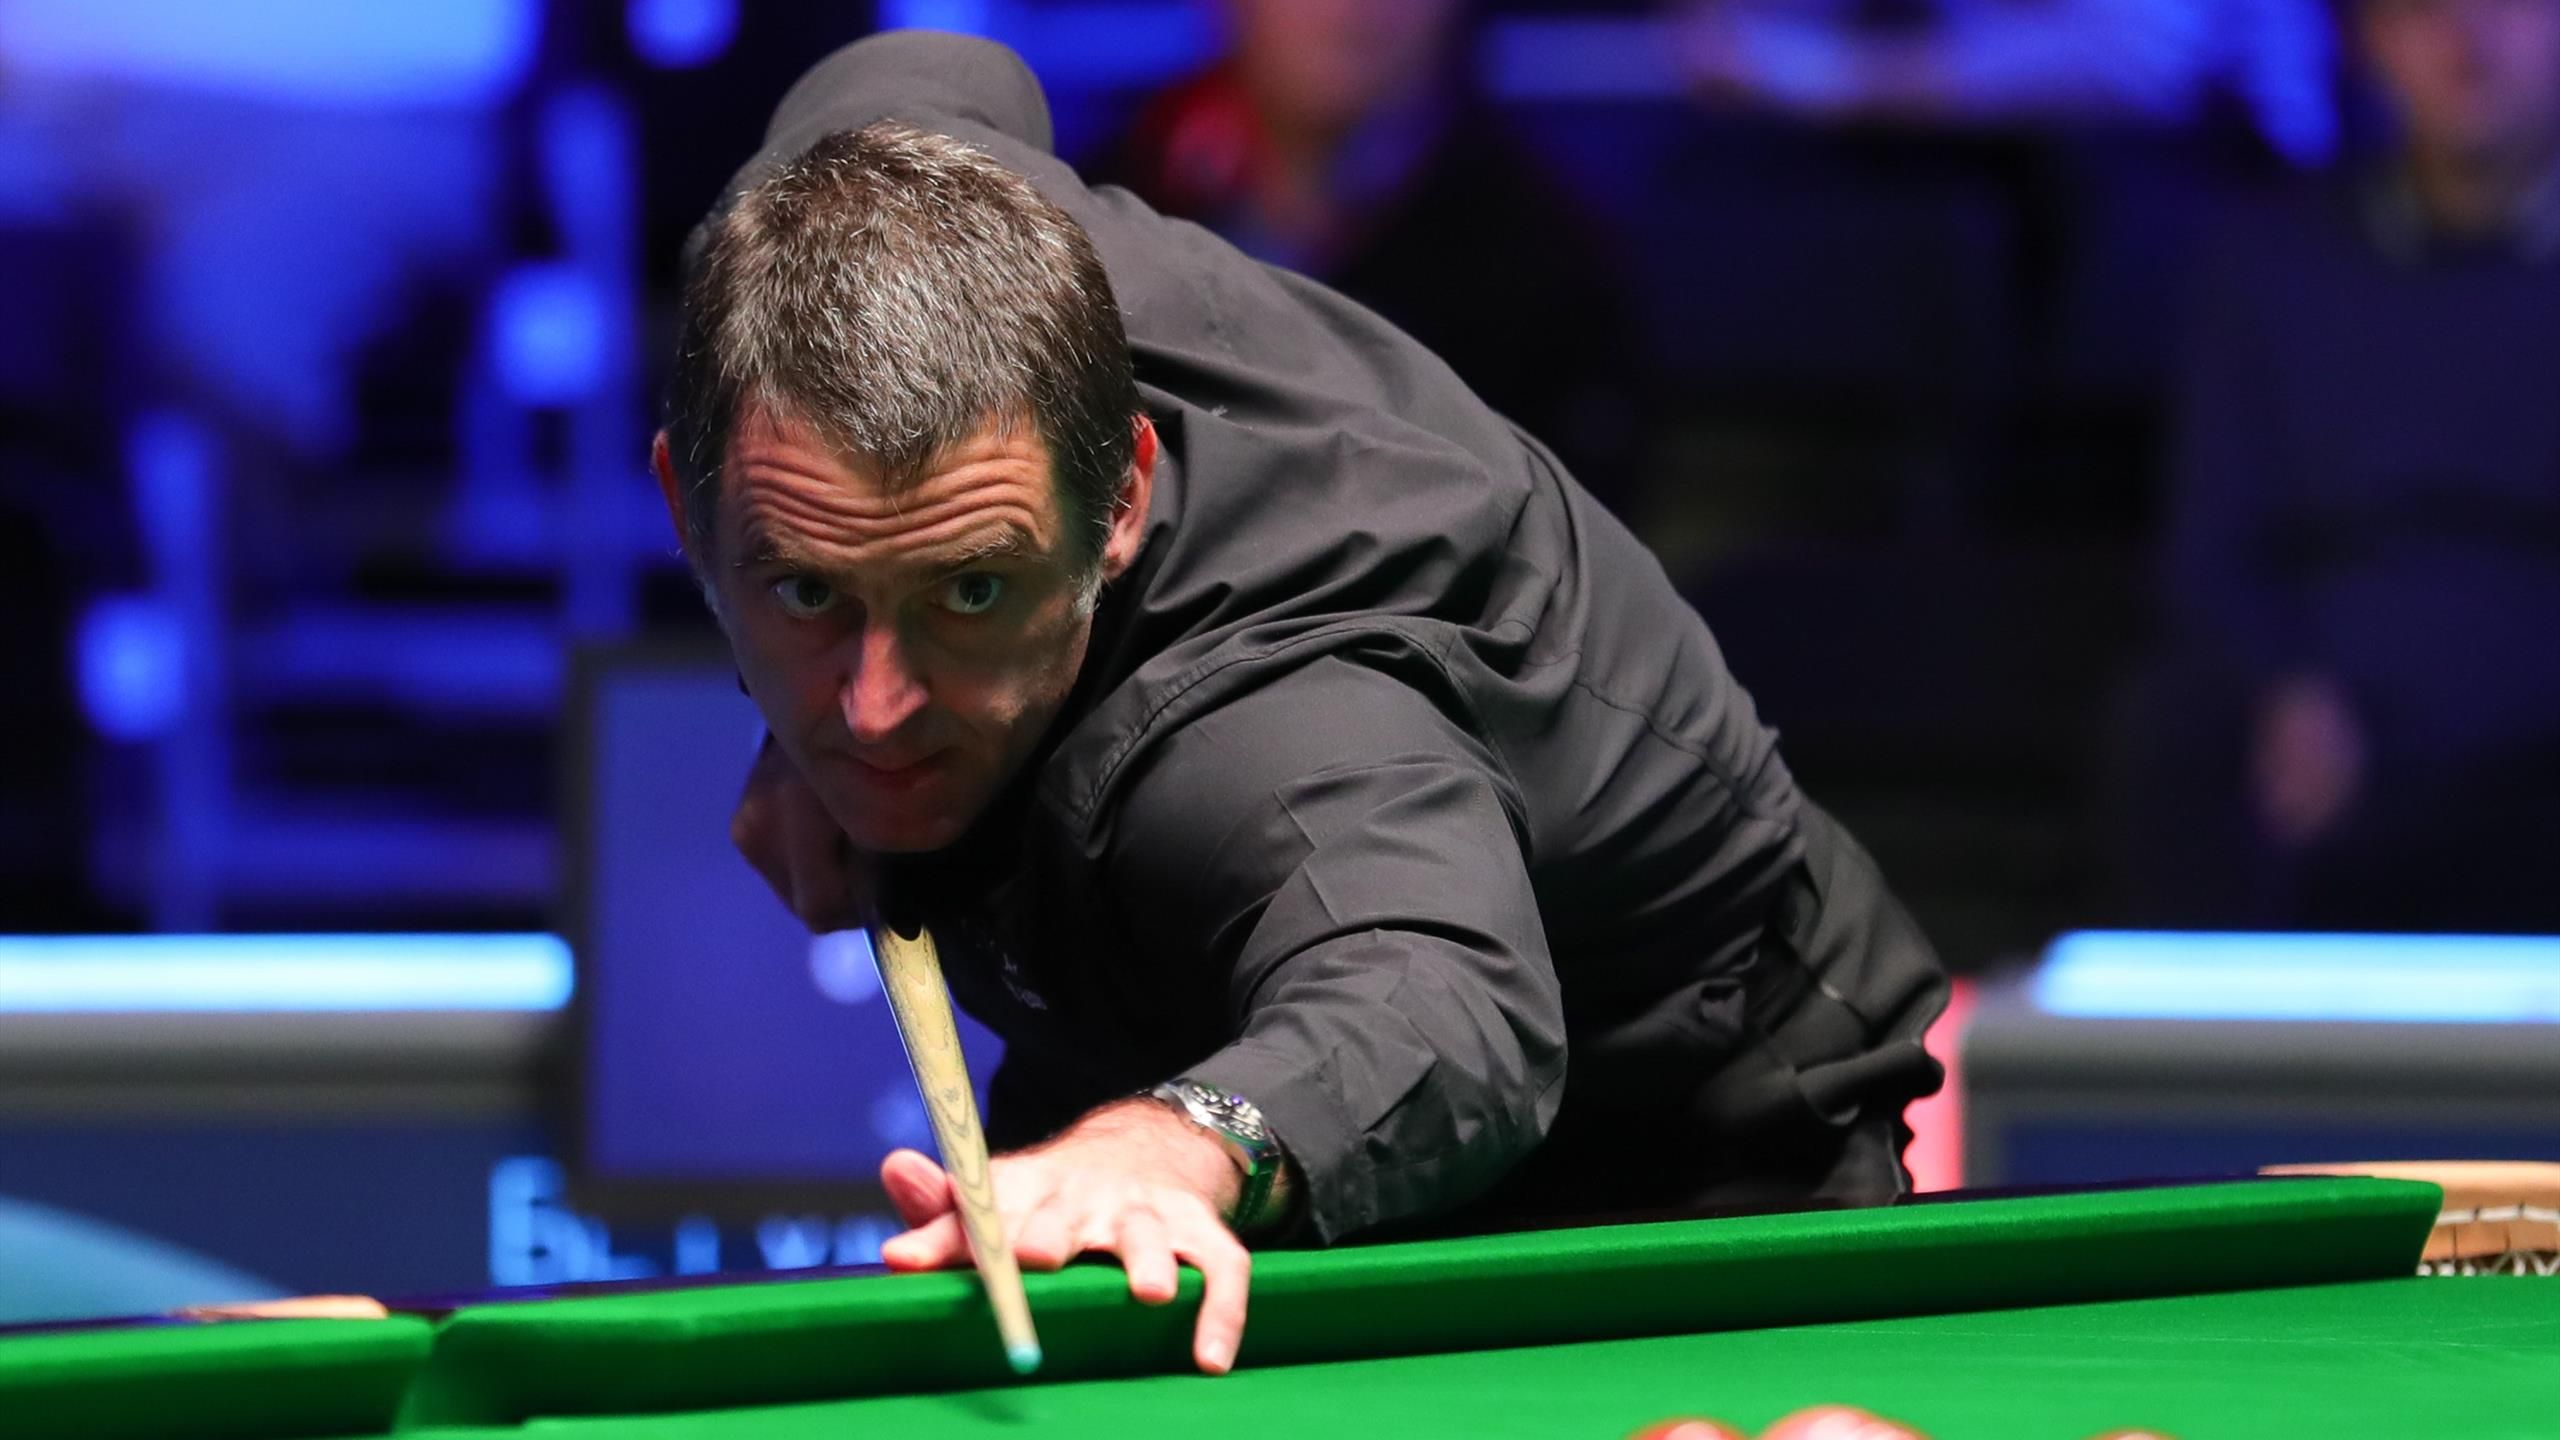 Champion of Champions 2021 - Draw, scores, schedule, results with Ronnie OSullivan and Judd Trump in action